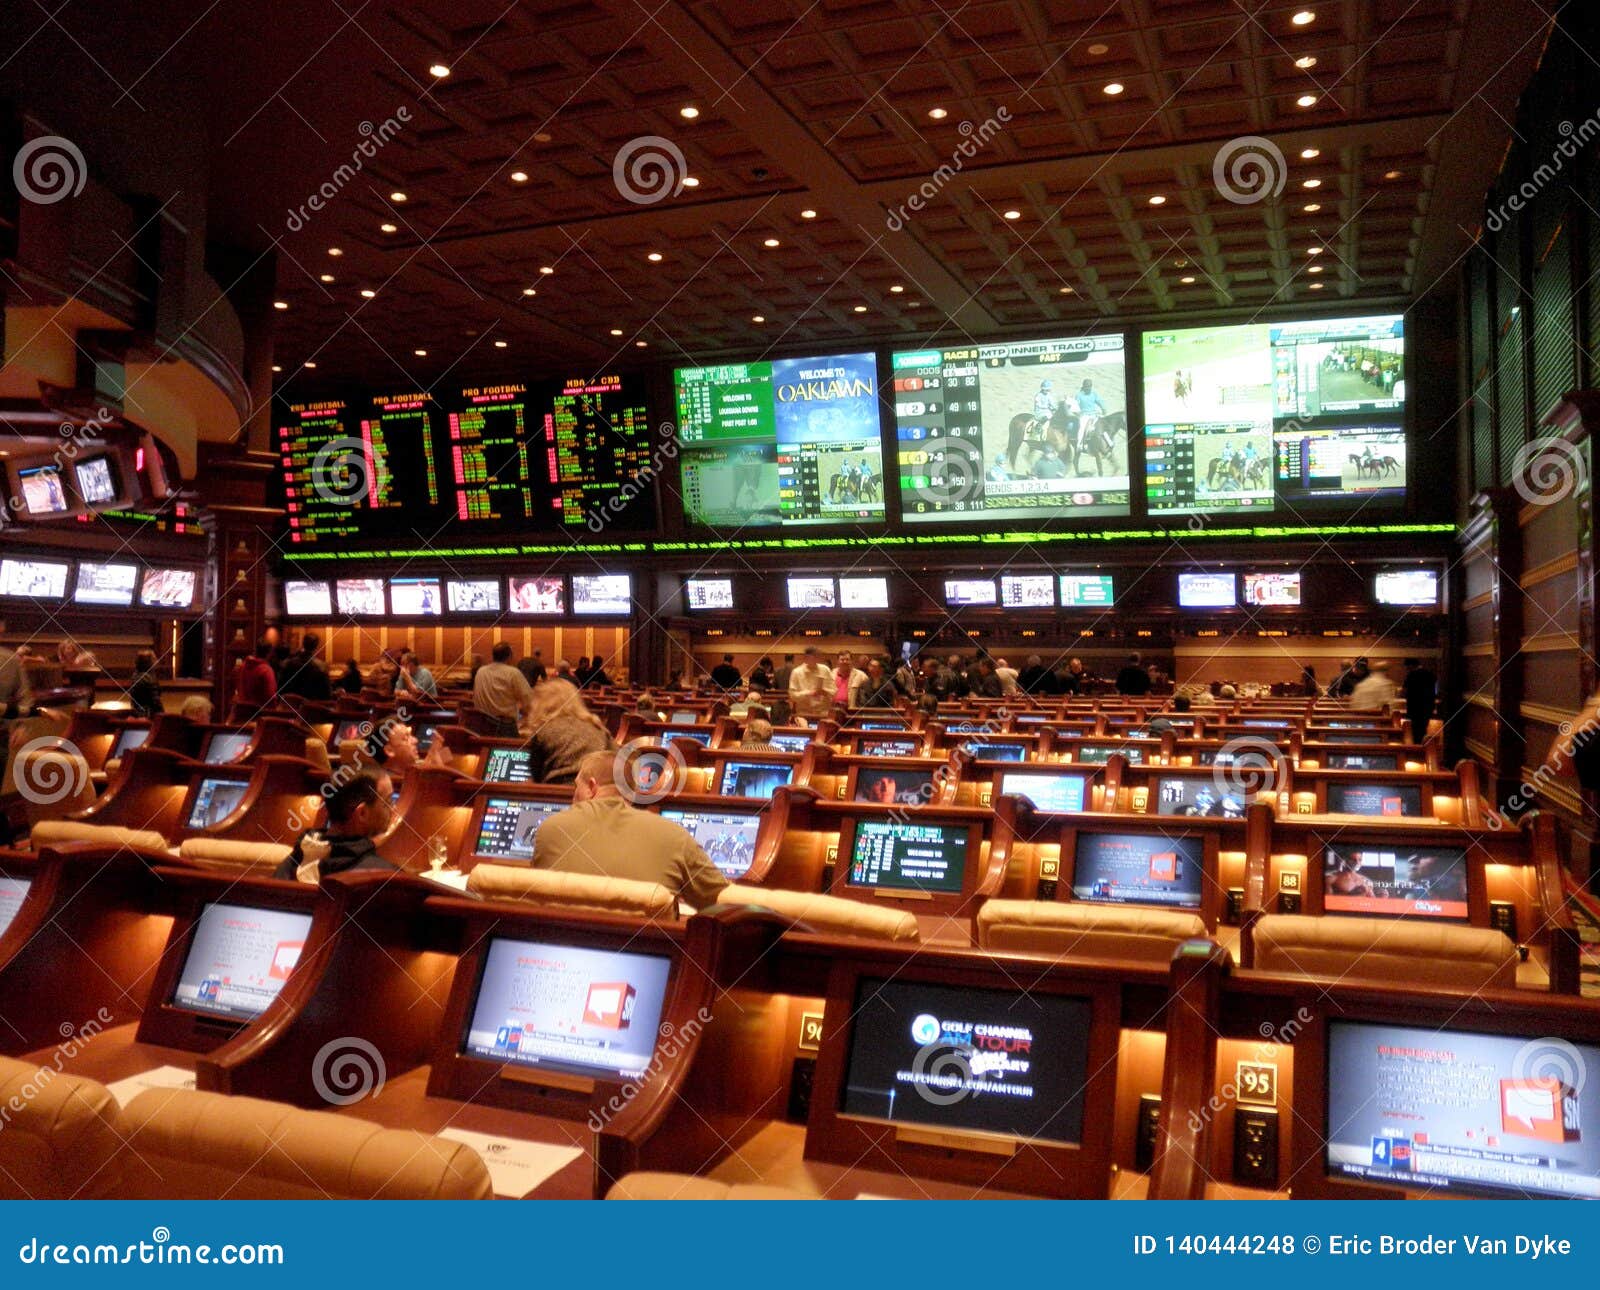 Las Vegas - February 7, 2010: Inside Wynn Sportsbook. Featuring plenty of TVs giant, big, or small, that bend around the sportsbook in a somewhat rounded L-shape. It has sports and the horse racing on giant screens betting casino football game money gamble online gambling odds web internet play website poker yellow window home computer page board passion bowl tech advertising banking royal winner